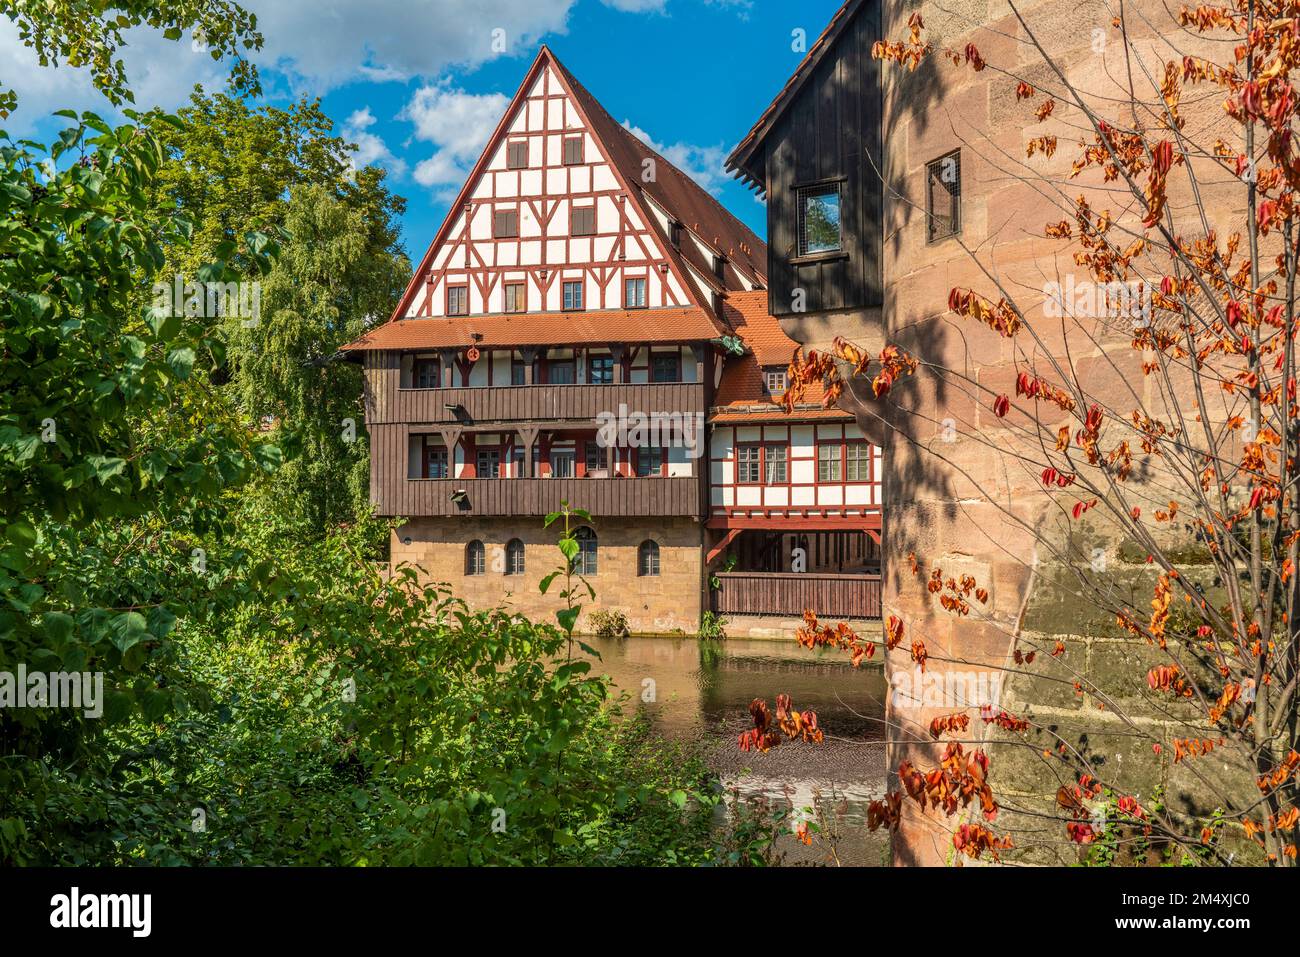 Germany, Bavaria, Nuremberg, Pegnitz river with historic Weinstadel house in background Stock Photo